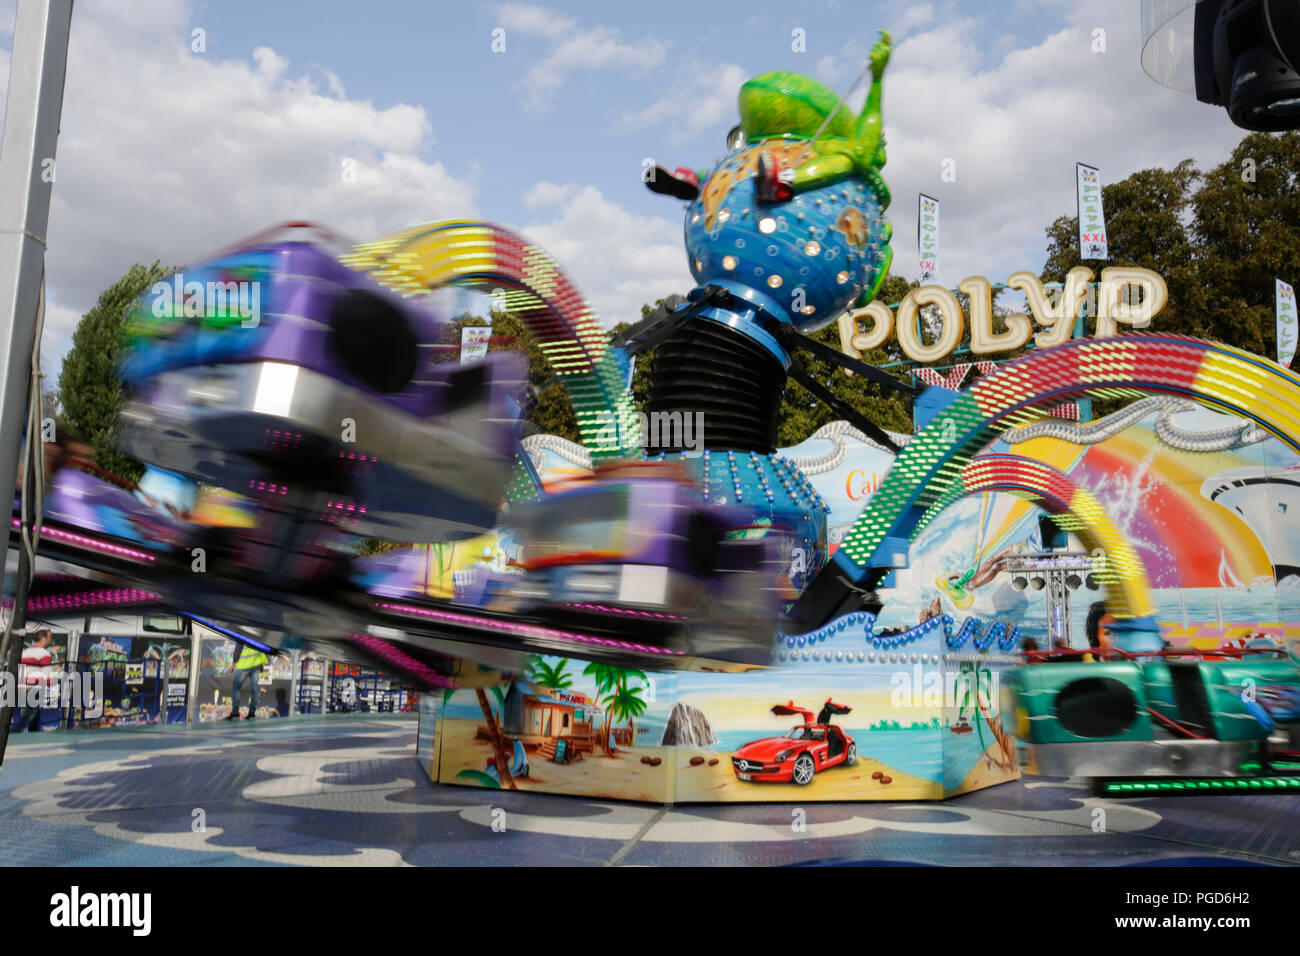 Worms, Germany. 25th August 2018. Te Polyp amusement ride at the 2018 Backfischfest fun fair. The largest wine and funfair along the Rhine, the Backfischfest started in Worms with the traditional handing over of power from the Lord Mayor to the mayor of the fishermen’s lea. Credit: Michael Debets/Alamy Live News Stock Photo